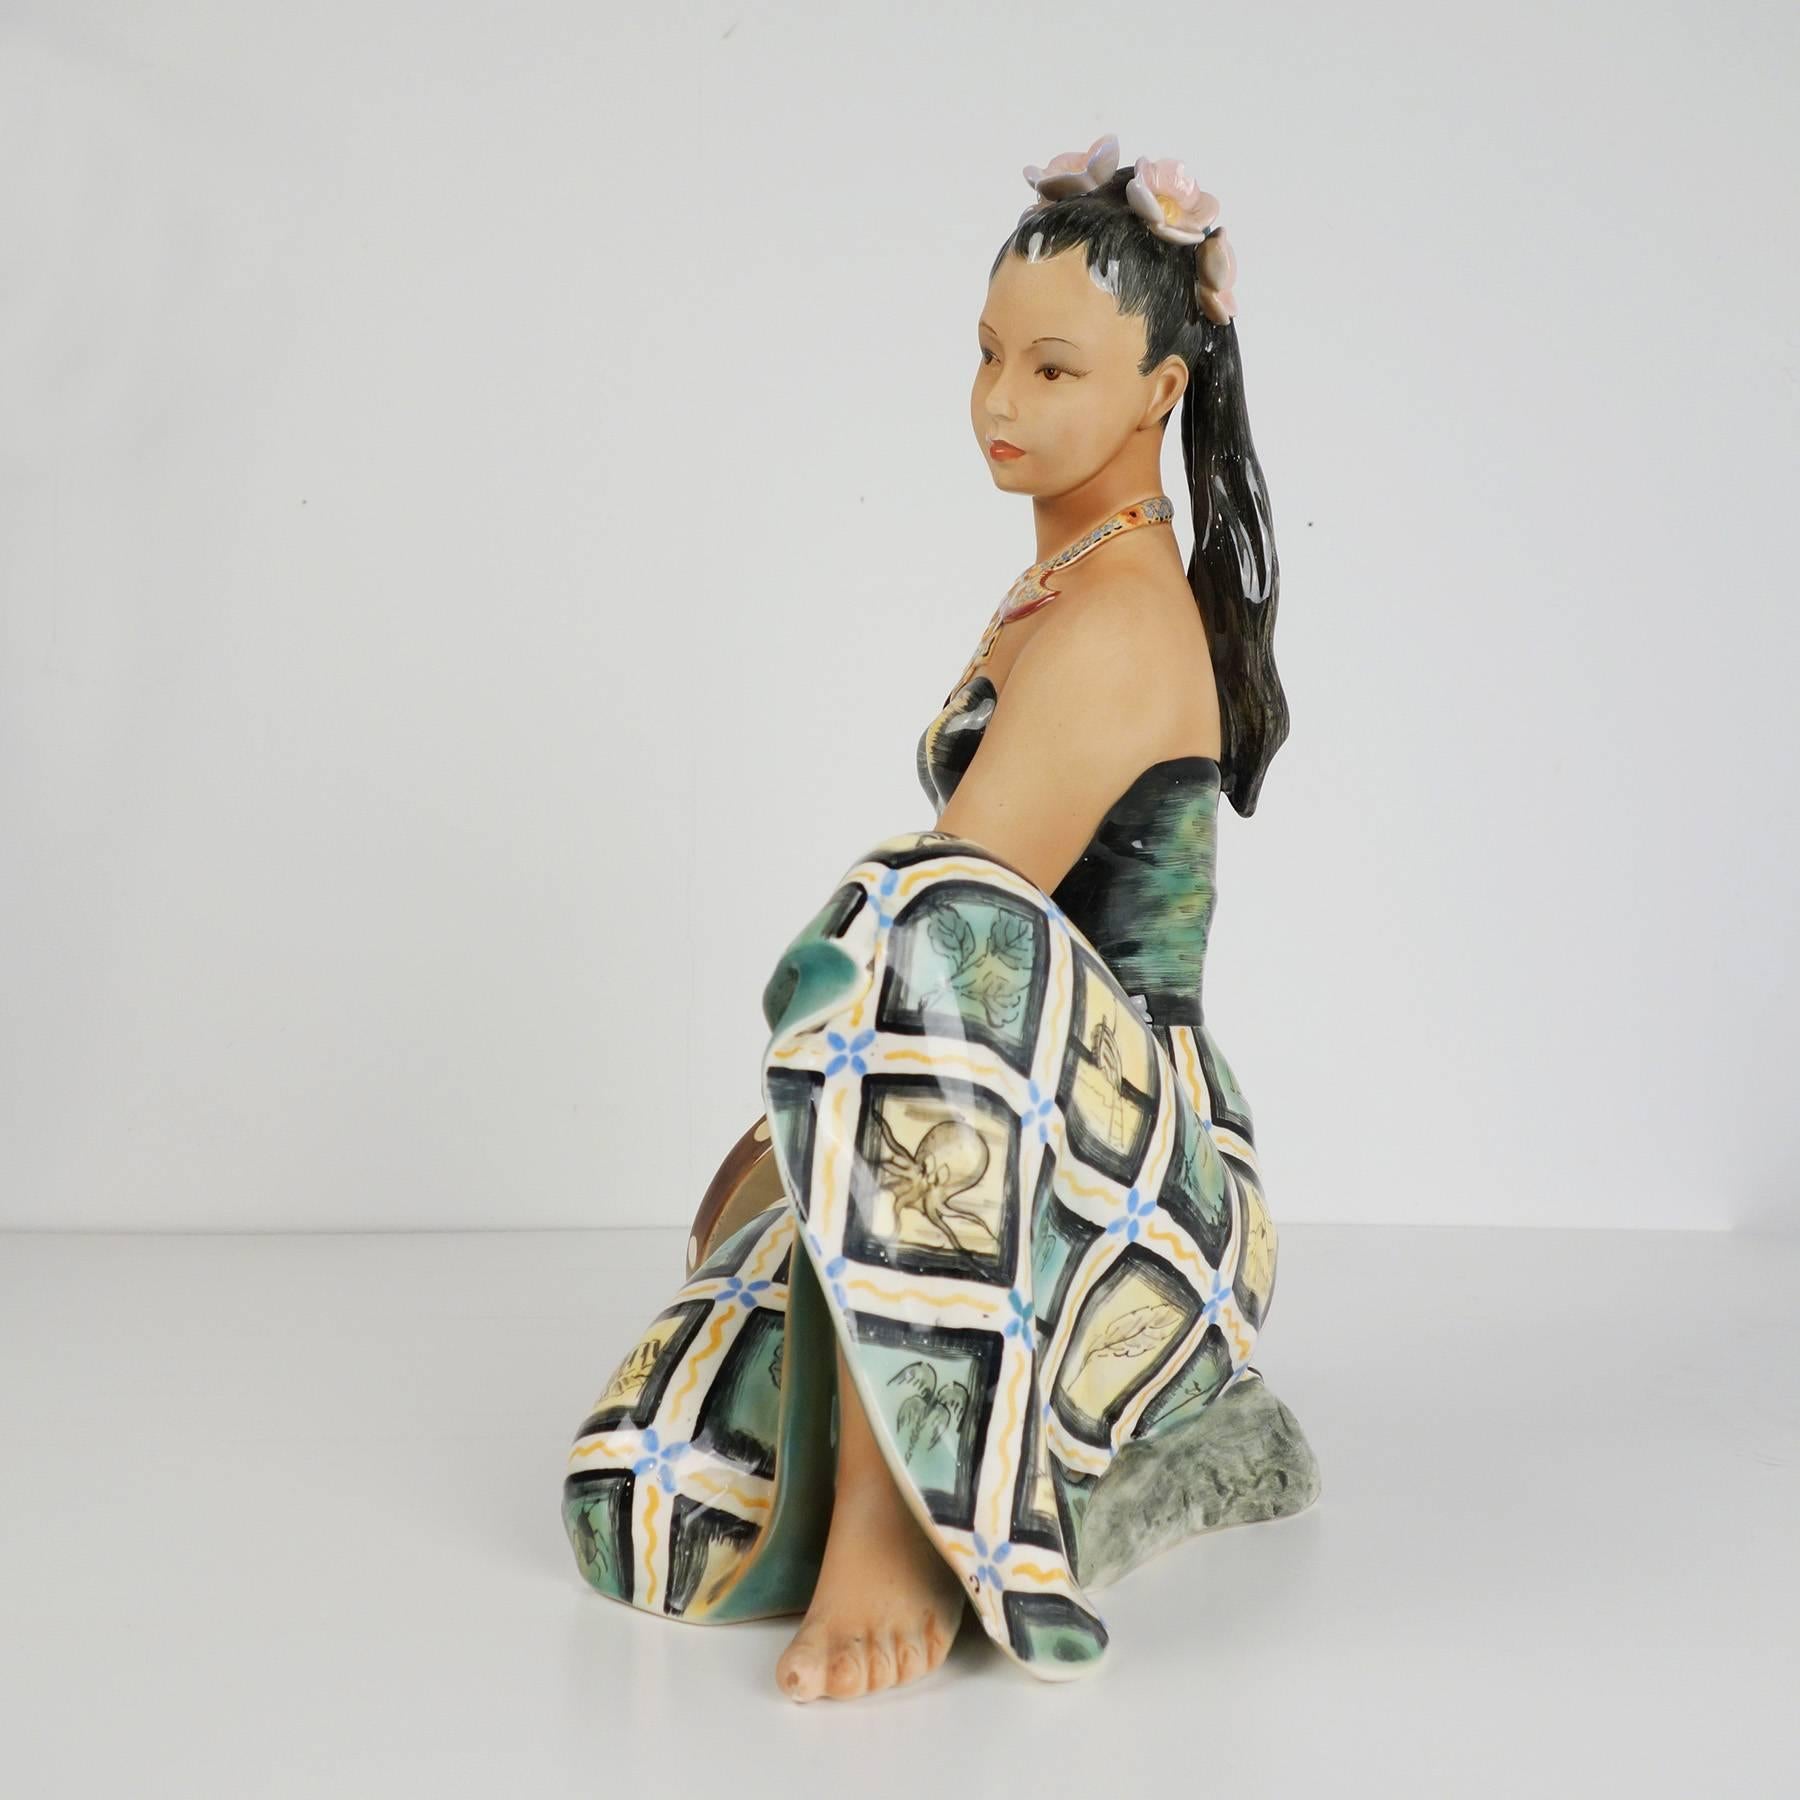 Beautiful big porcelain figurine, manufactured in the 1940s in Torino Italy by Le Bertetti. The figurine is executed unusually delicate and very expressive. It's hand-painted and glazed - partly mat, partly glossy.

The condition of the figurine